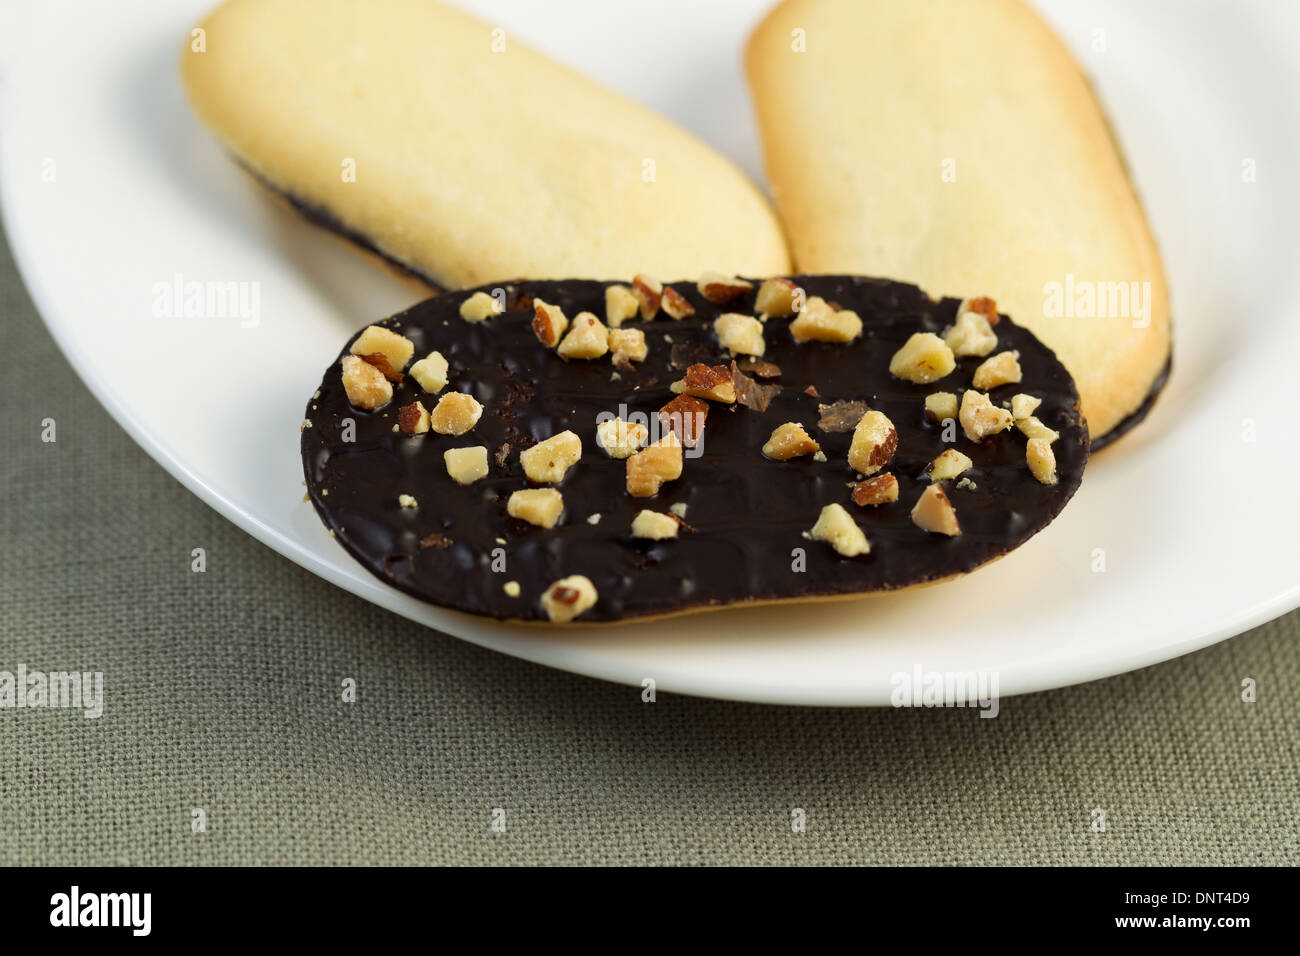 Horizontal photo of dark rich chocolate cookies and nuts on white plate with textured table cloth underneath Stock Photo